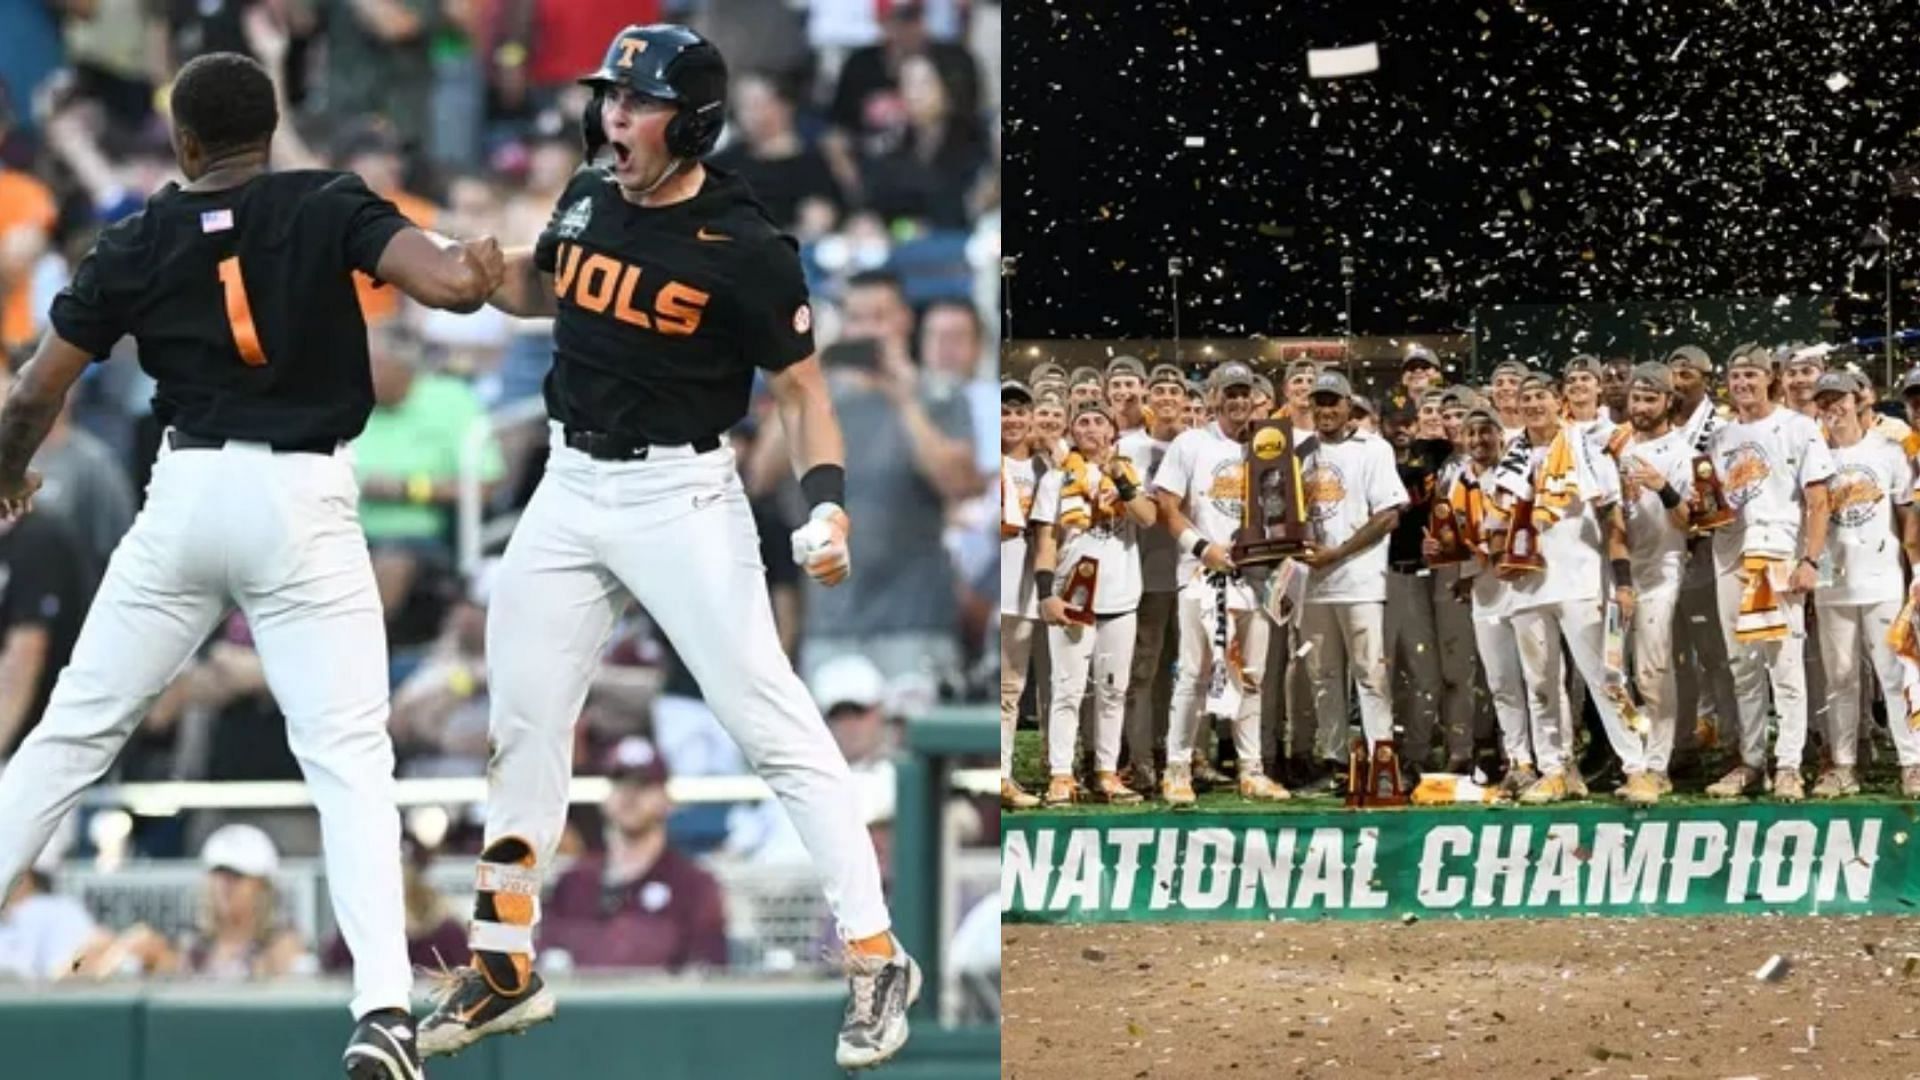 The Tennessee Volunteers won their first-ever national baseball title with a 6-5 win over the Texas A&amp;M Aggies in Game 3 of the College World Series final on Moinday at the Charles Schwab Field in Omaha, Nebraska. (Image Source: IMAGN)